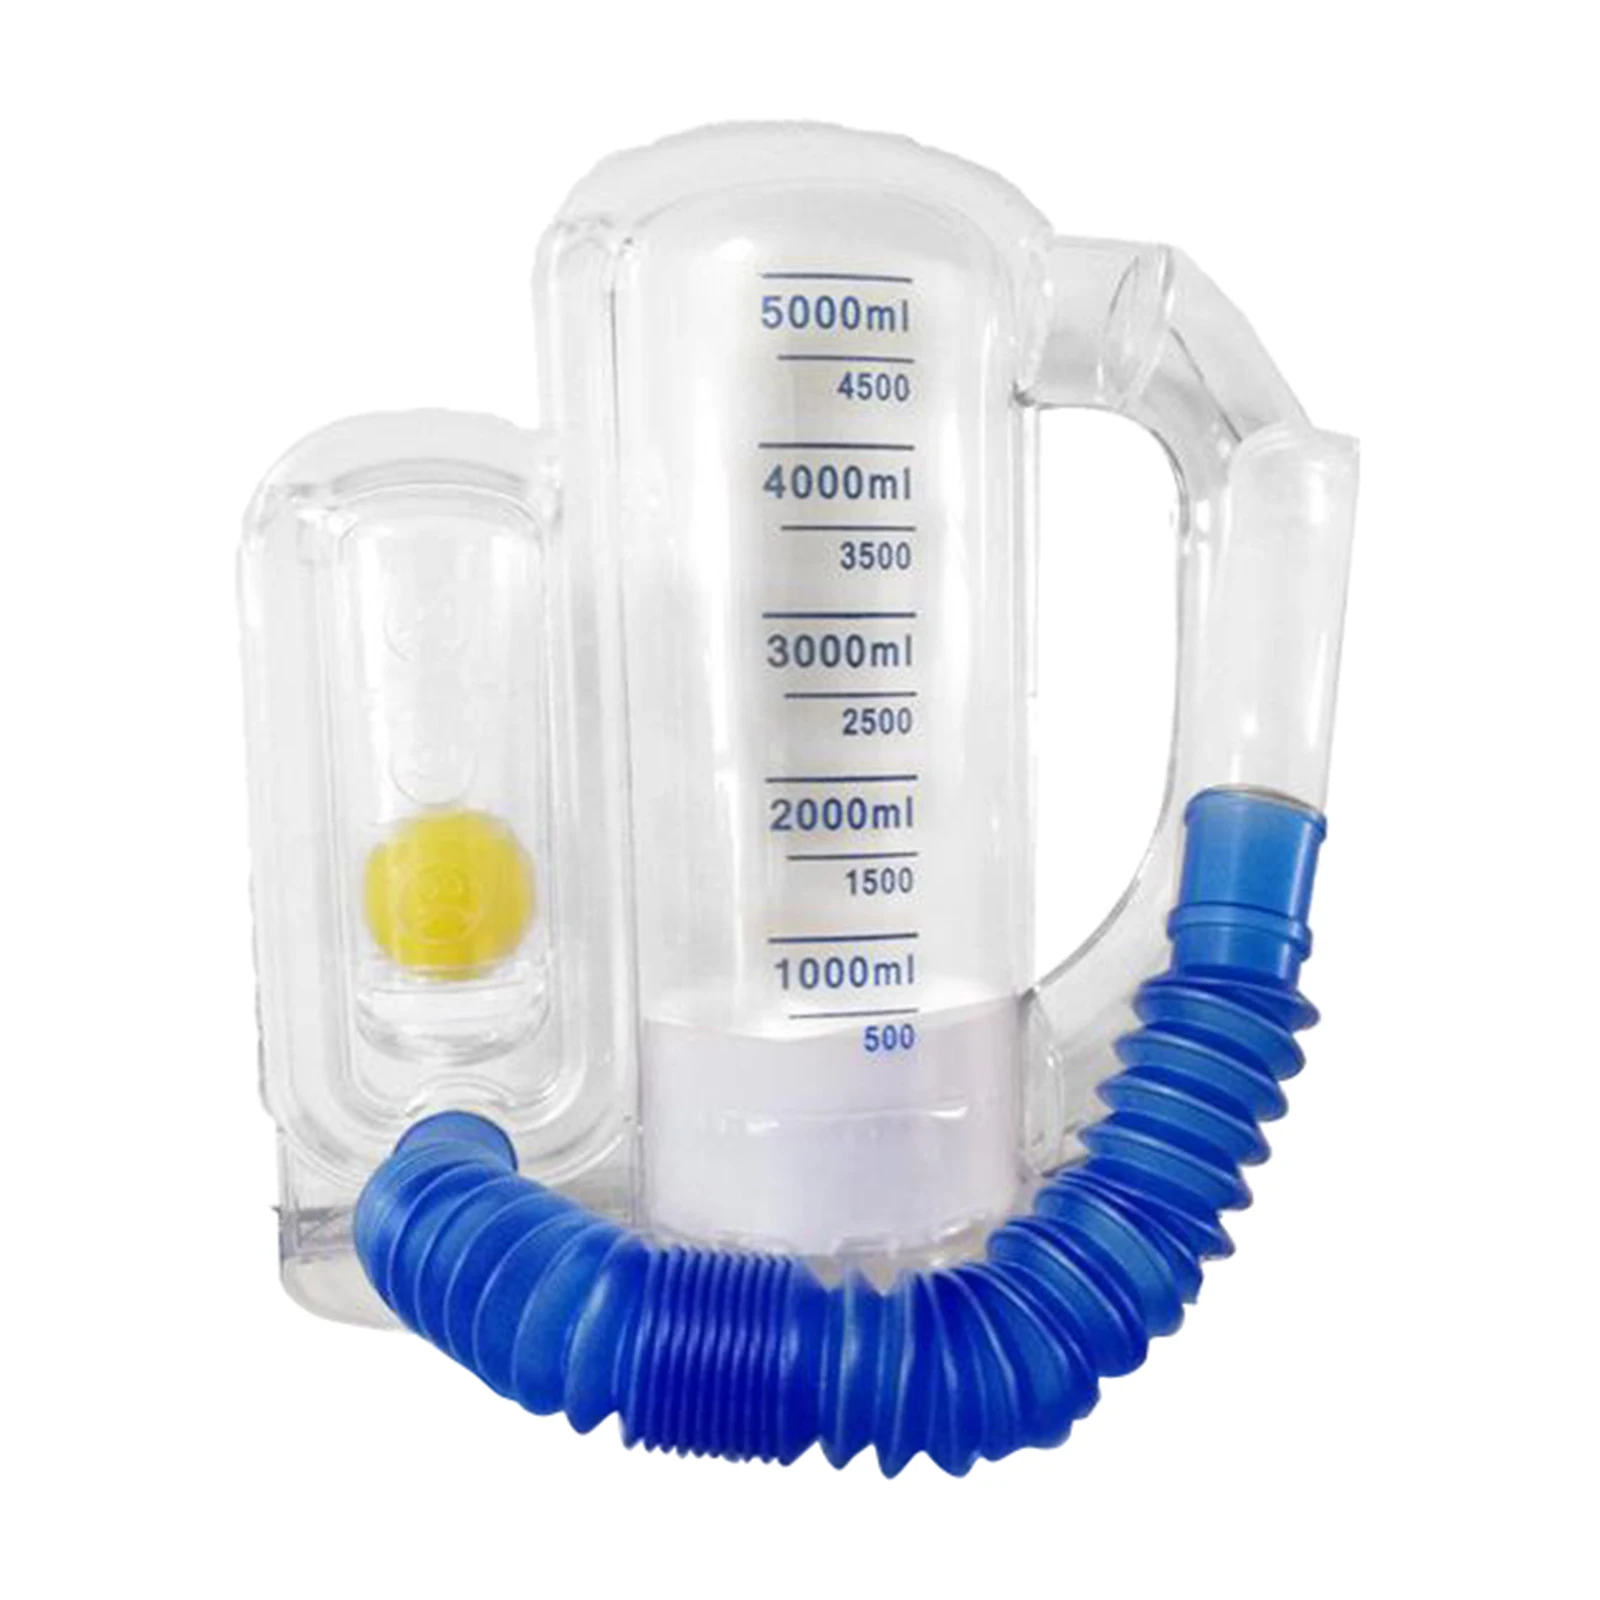 Care Deep Breathing Lung Exerciser | Washable & Hygienic | Breath Measurement System